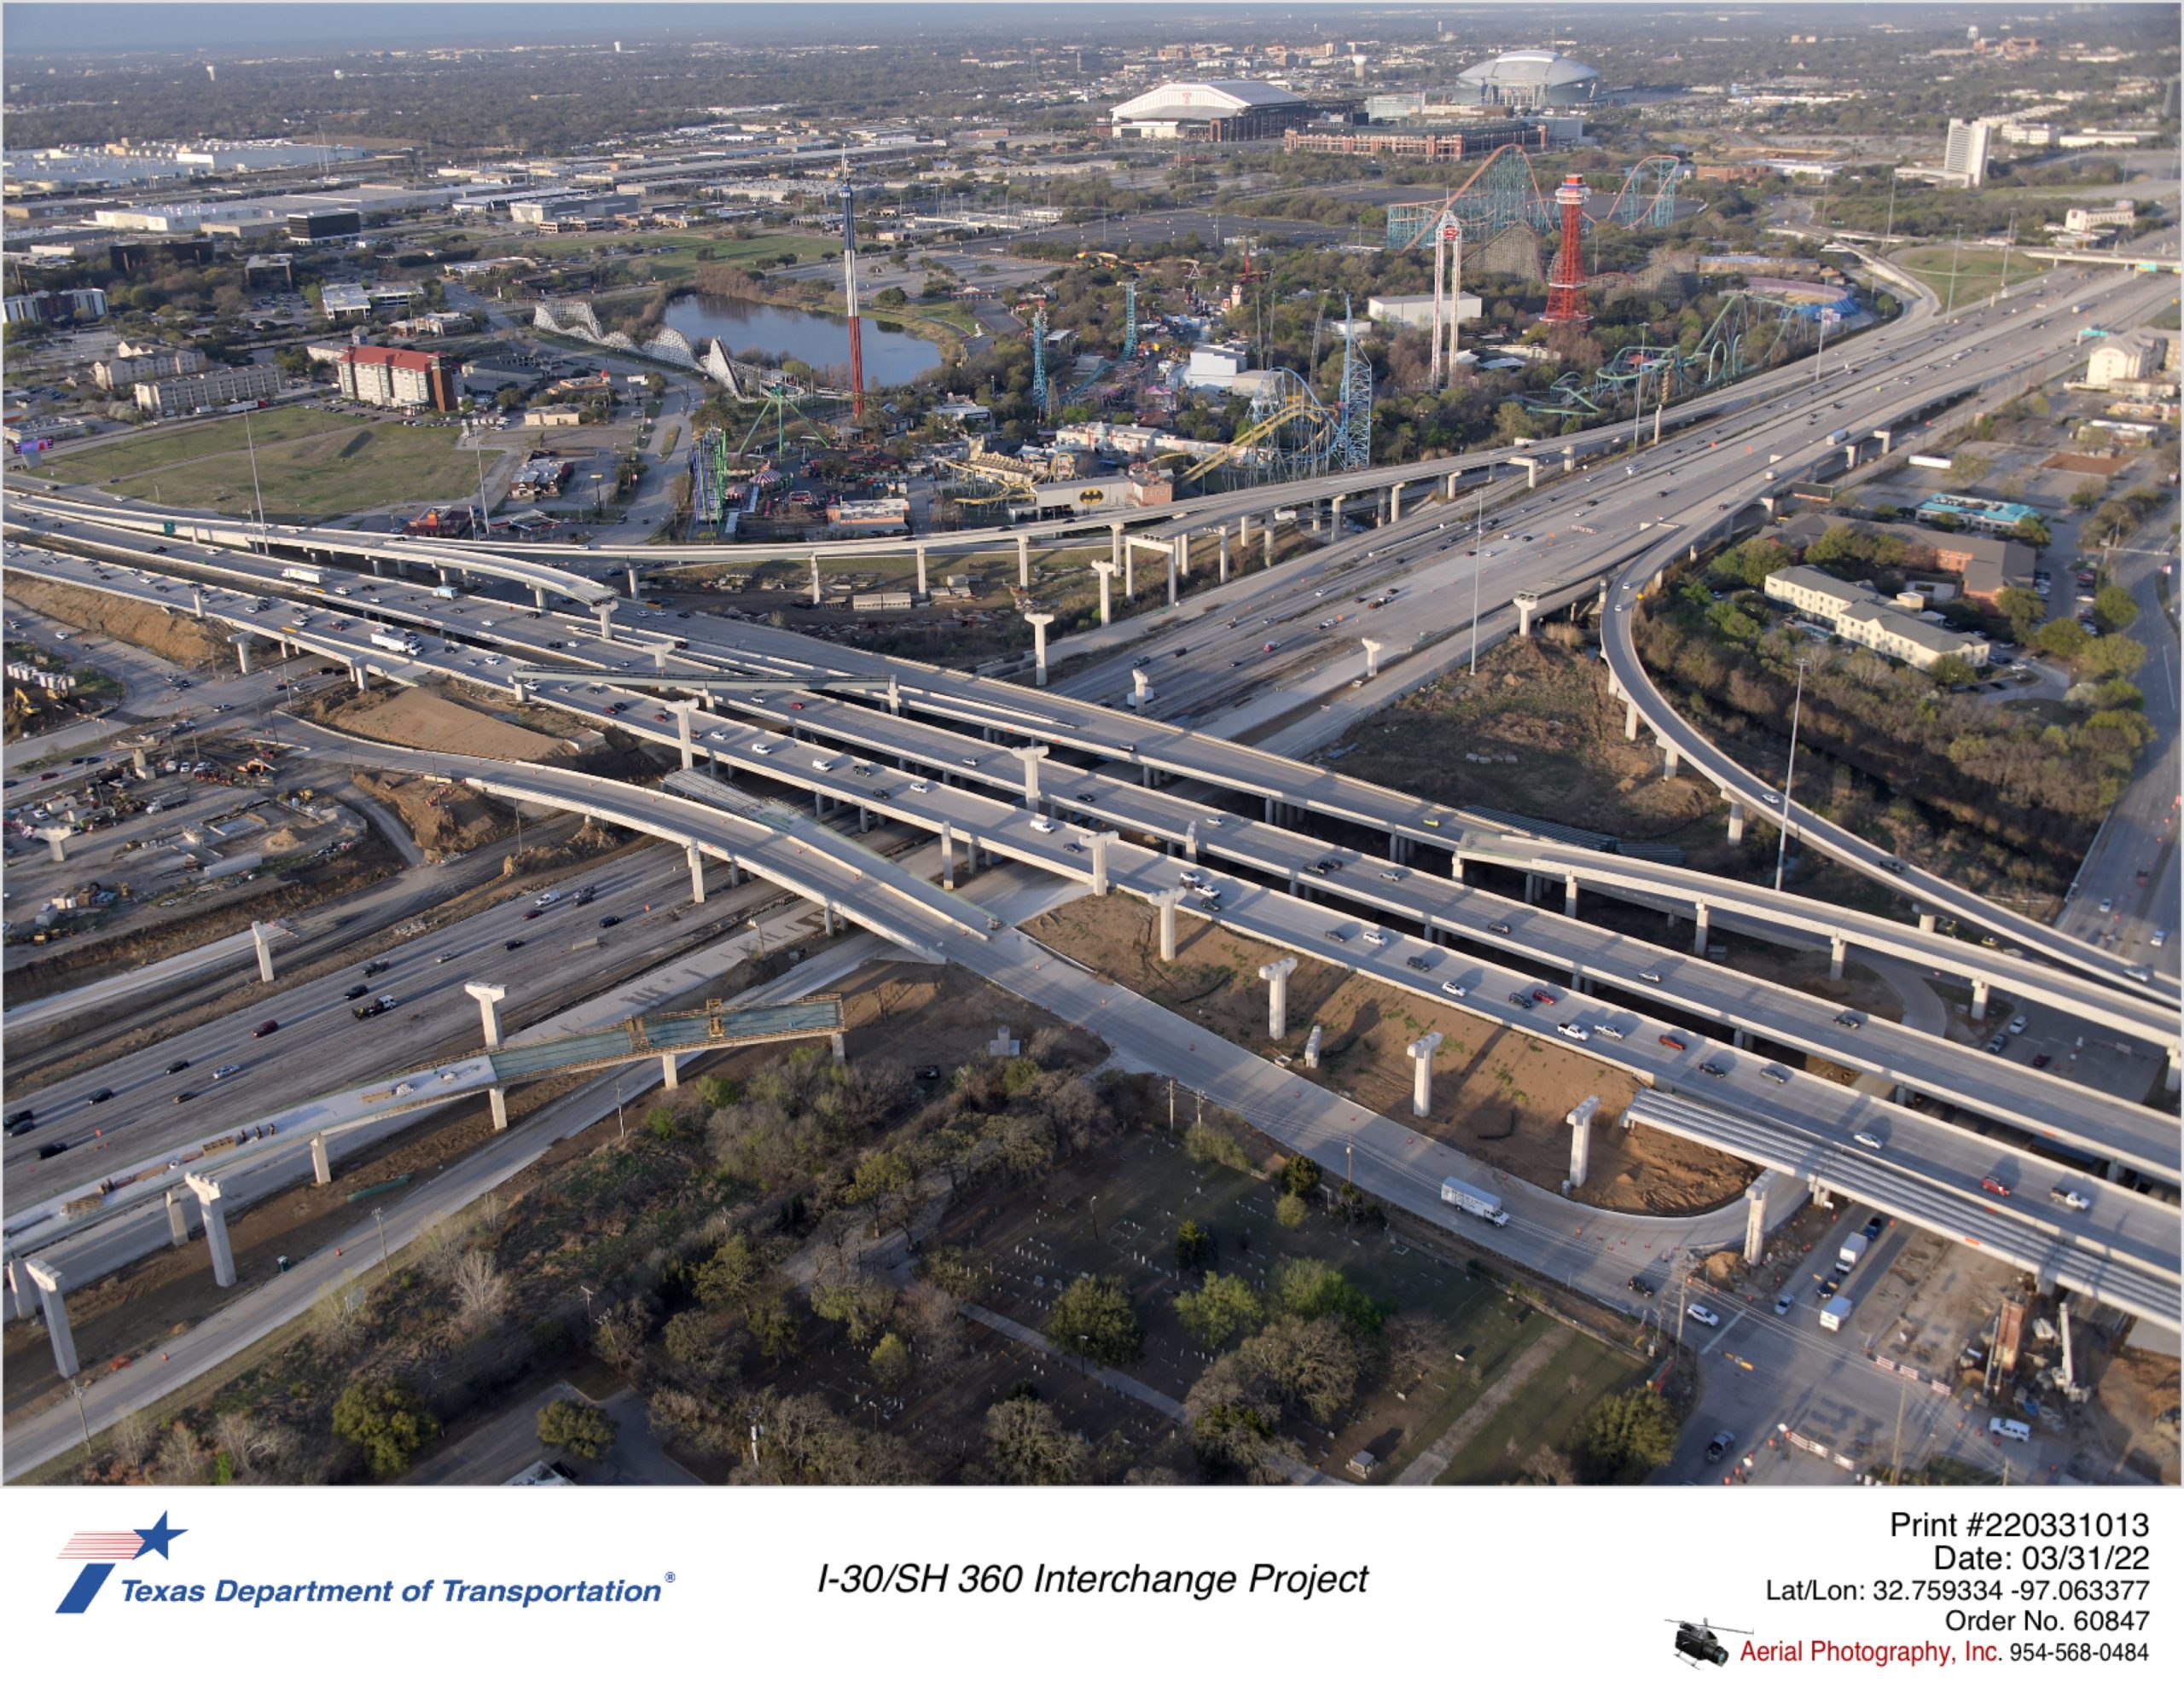 I-30/SH 360 interchange looking southwest over Lamar Blvd. Progress shown building the west to north connector ramp.